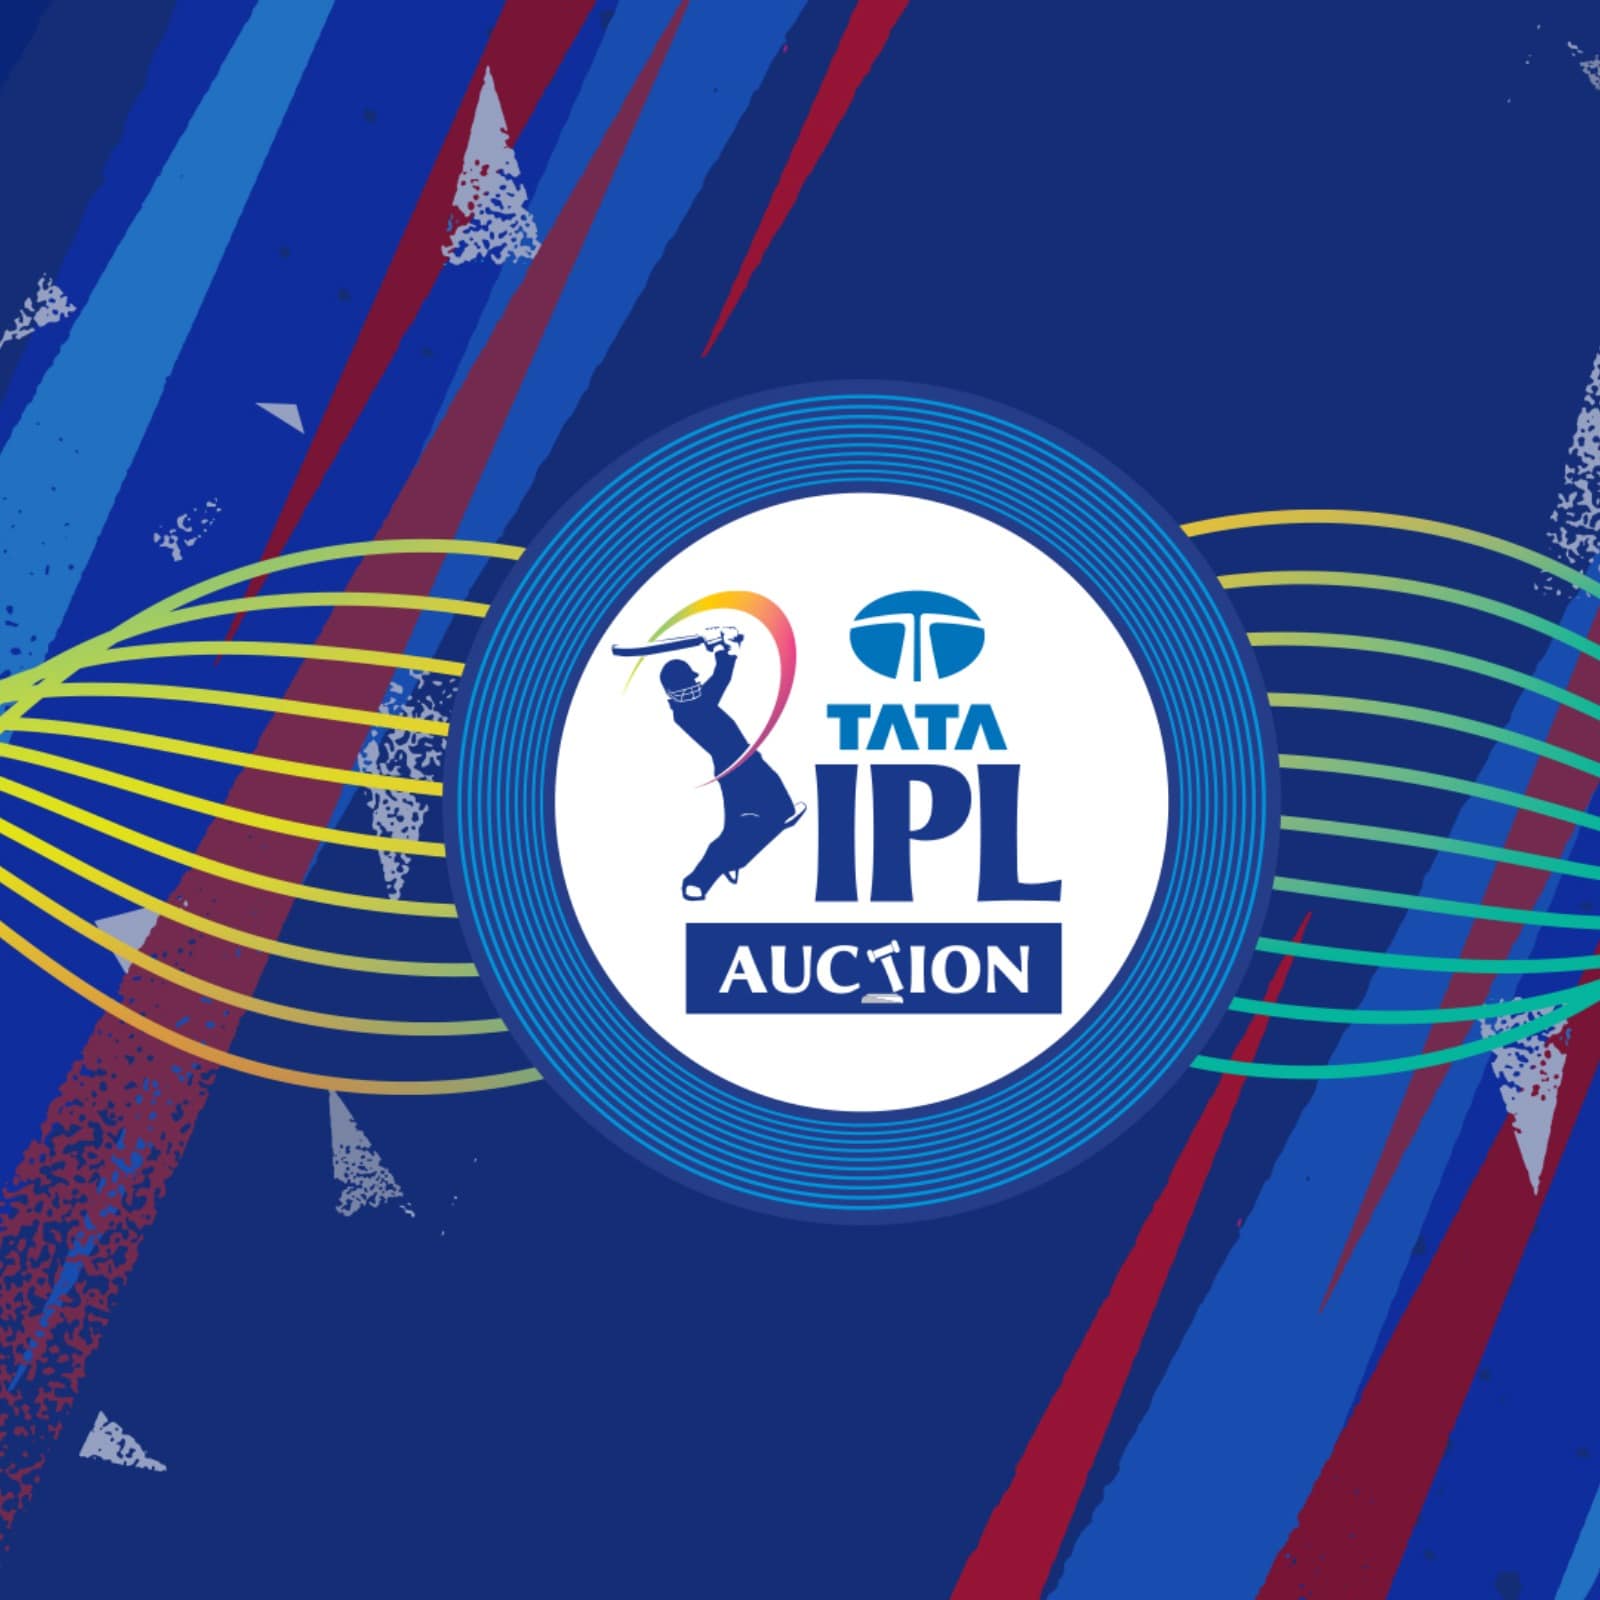 PKL 10 auction all 12 teams remaining purse value in Telugu | Total India  sports - YouTube